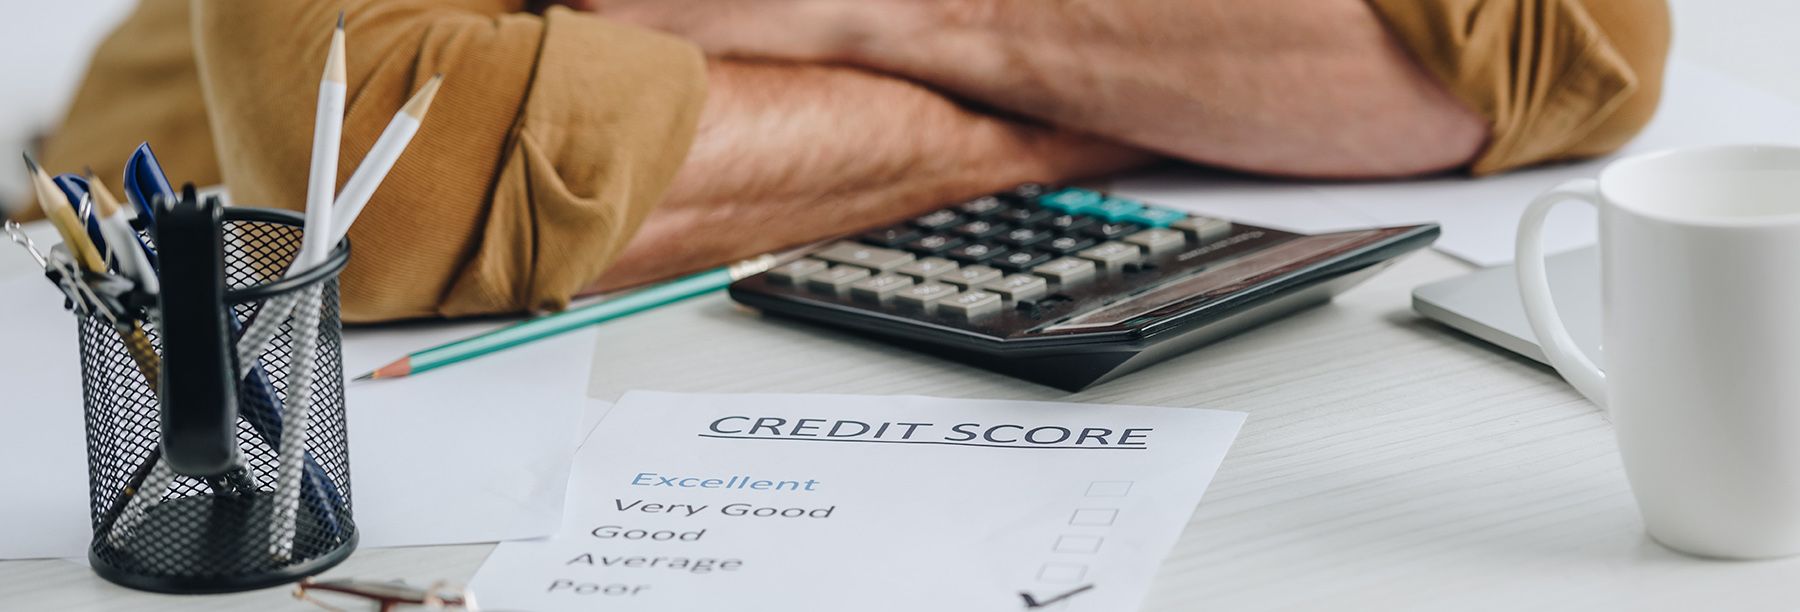 6 Best Ways to Reduce Your Credit Score